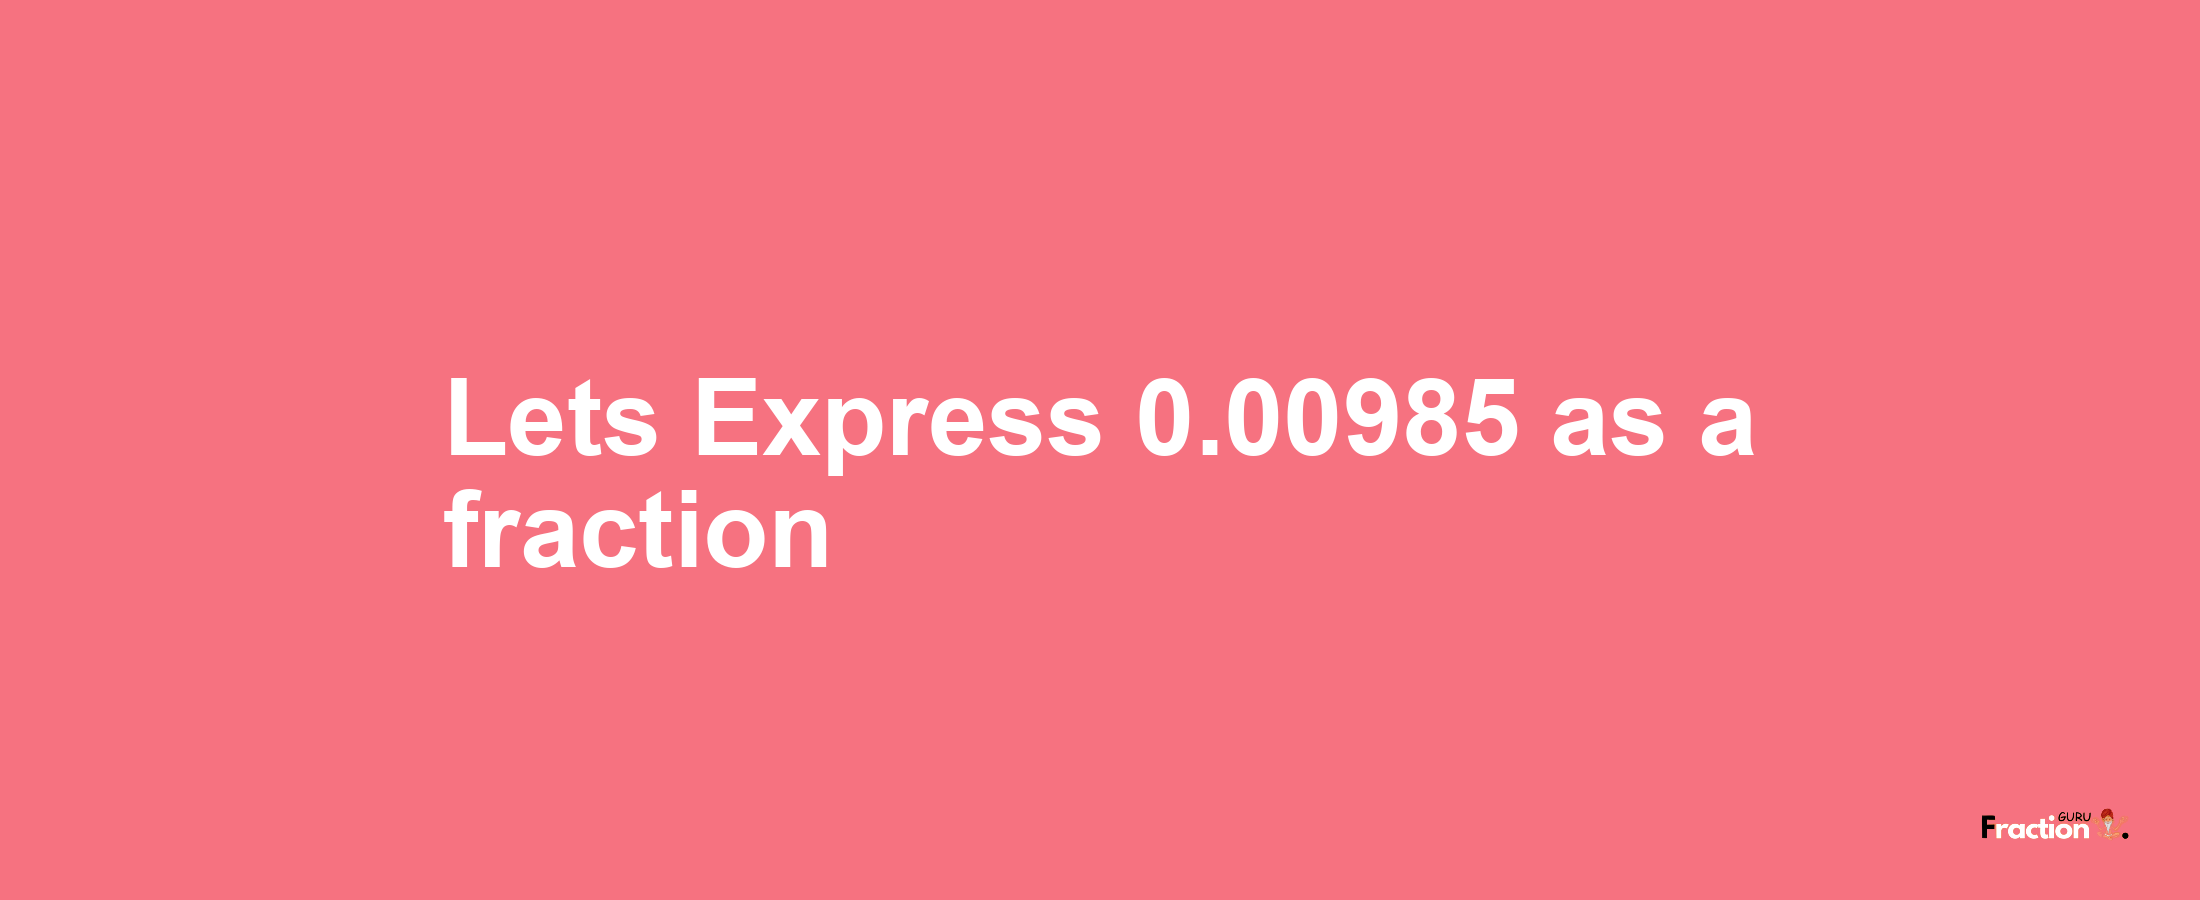 Lets Express 0.00985 as afraction